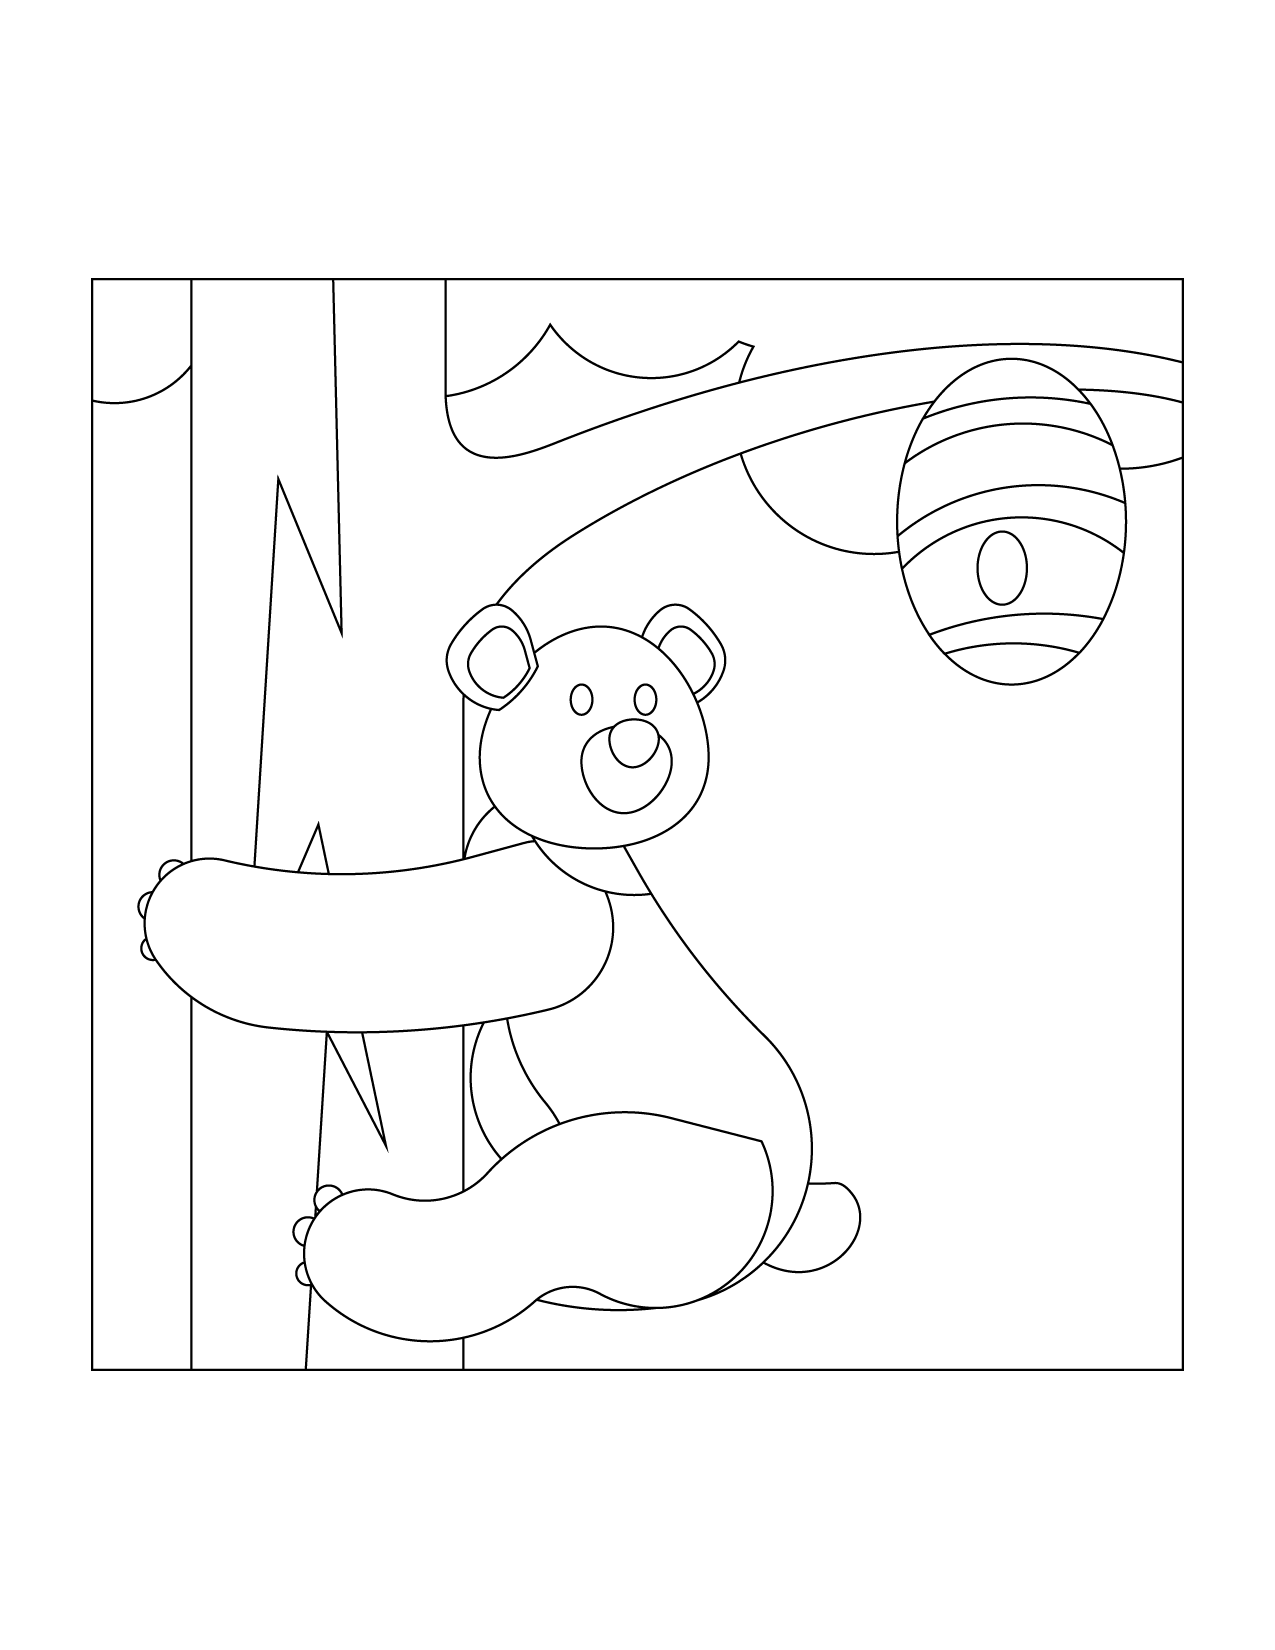 Bear Climbing Tree For Honey Coloring Page